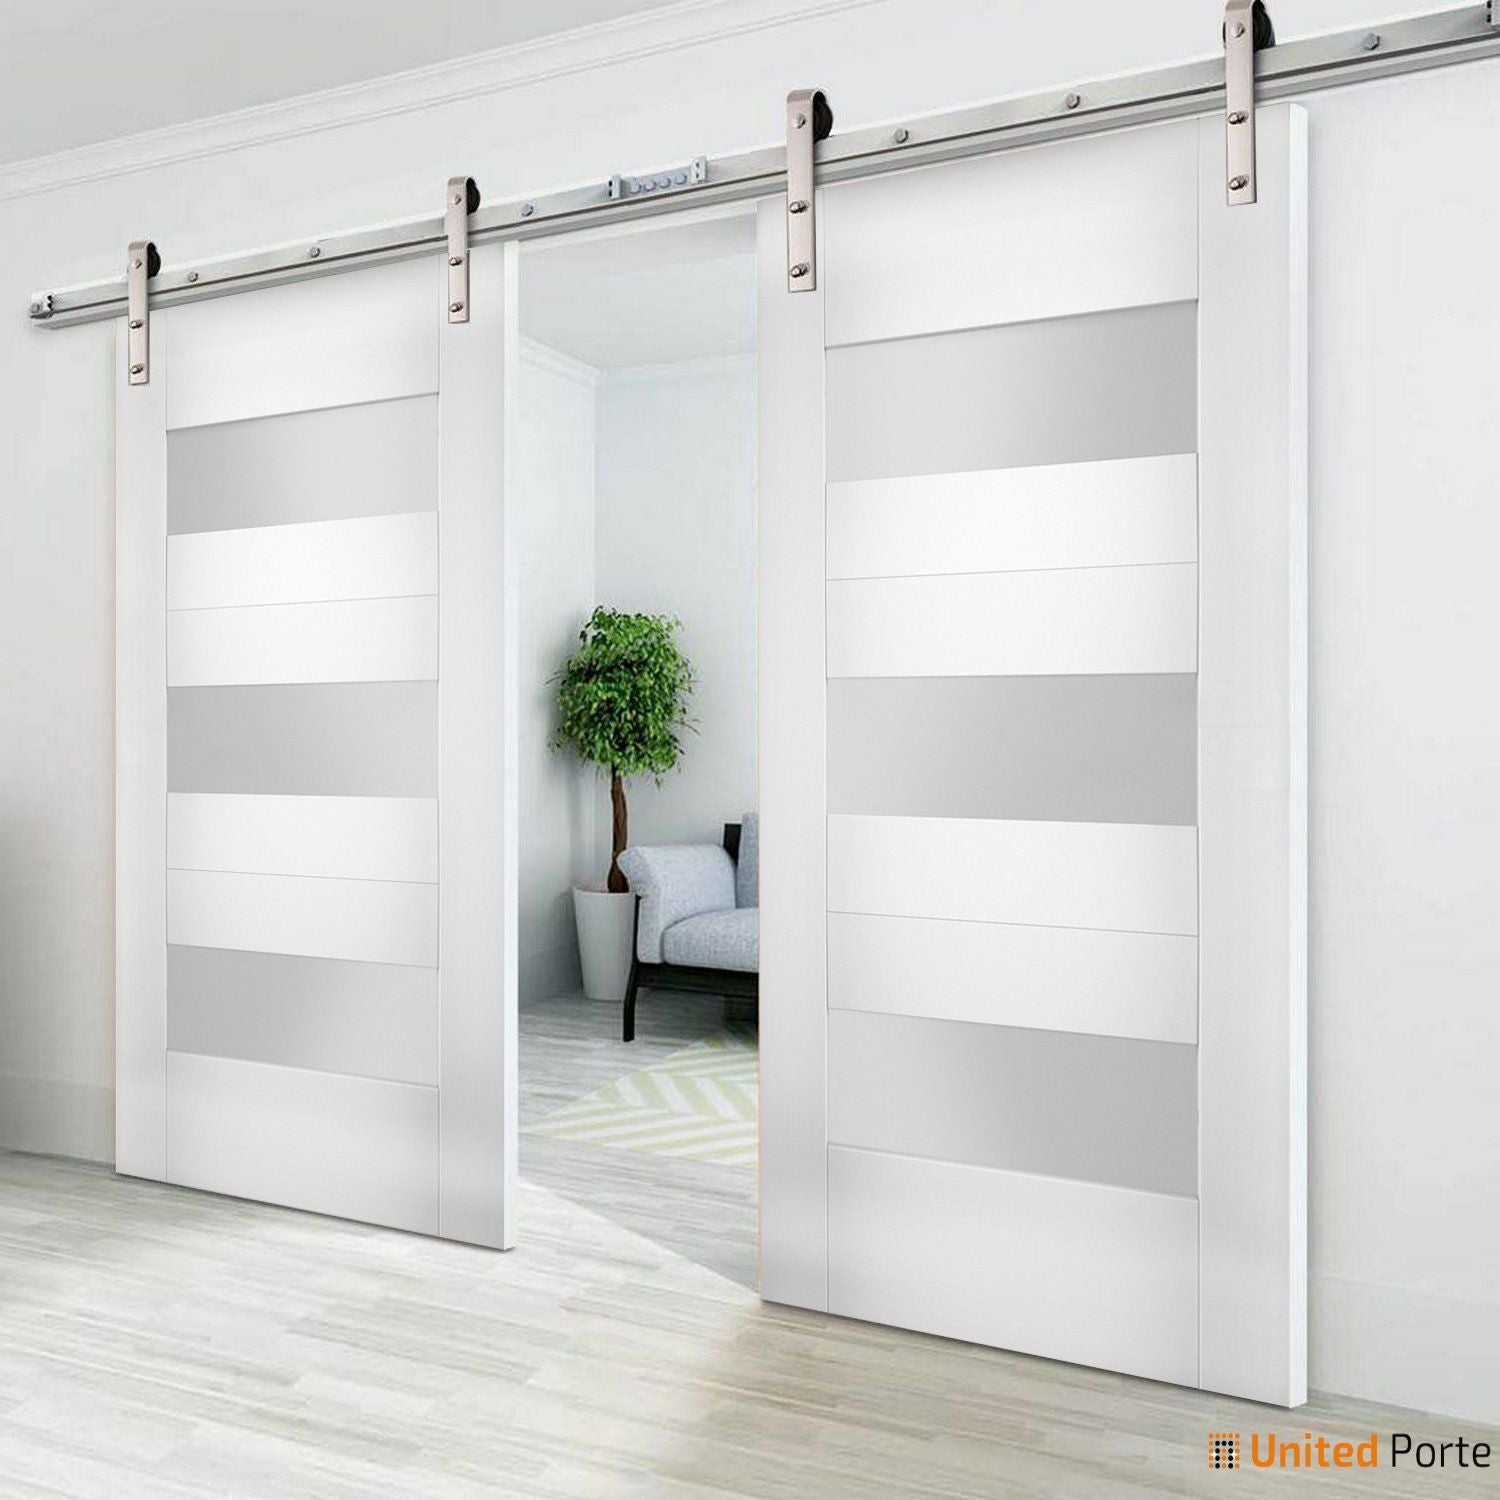 Sete 6003 White Silk Double Barn Door with Frosted Glass | Stainless Steel Rail